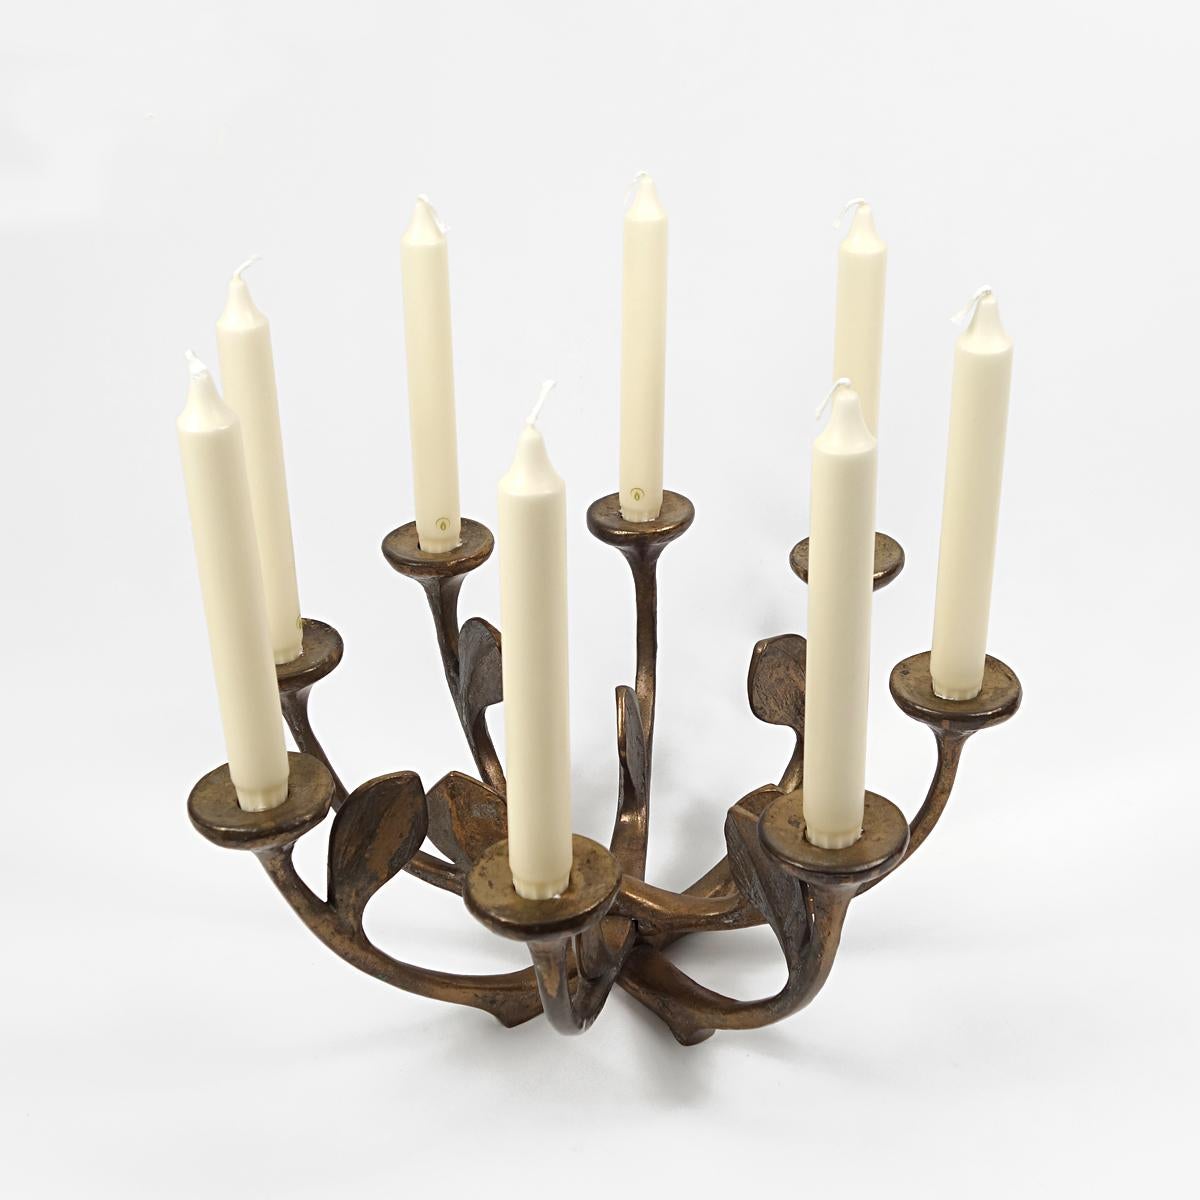 Mid-century brutalist style large and heavy bronze 8-armed candelabra by Michael Harjes from Germany.

This exceptionally large centerpiece is an attractive piece of brutalist casting. The organically shaped arms are styled like an airy bunch of